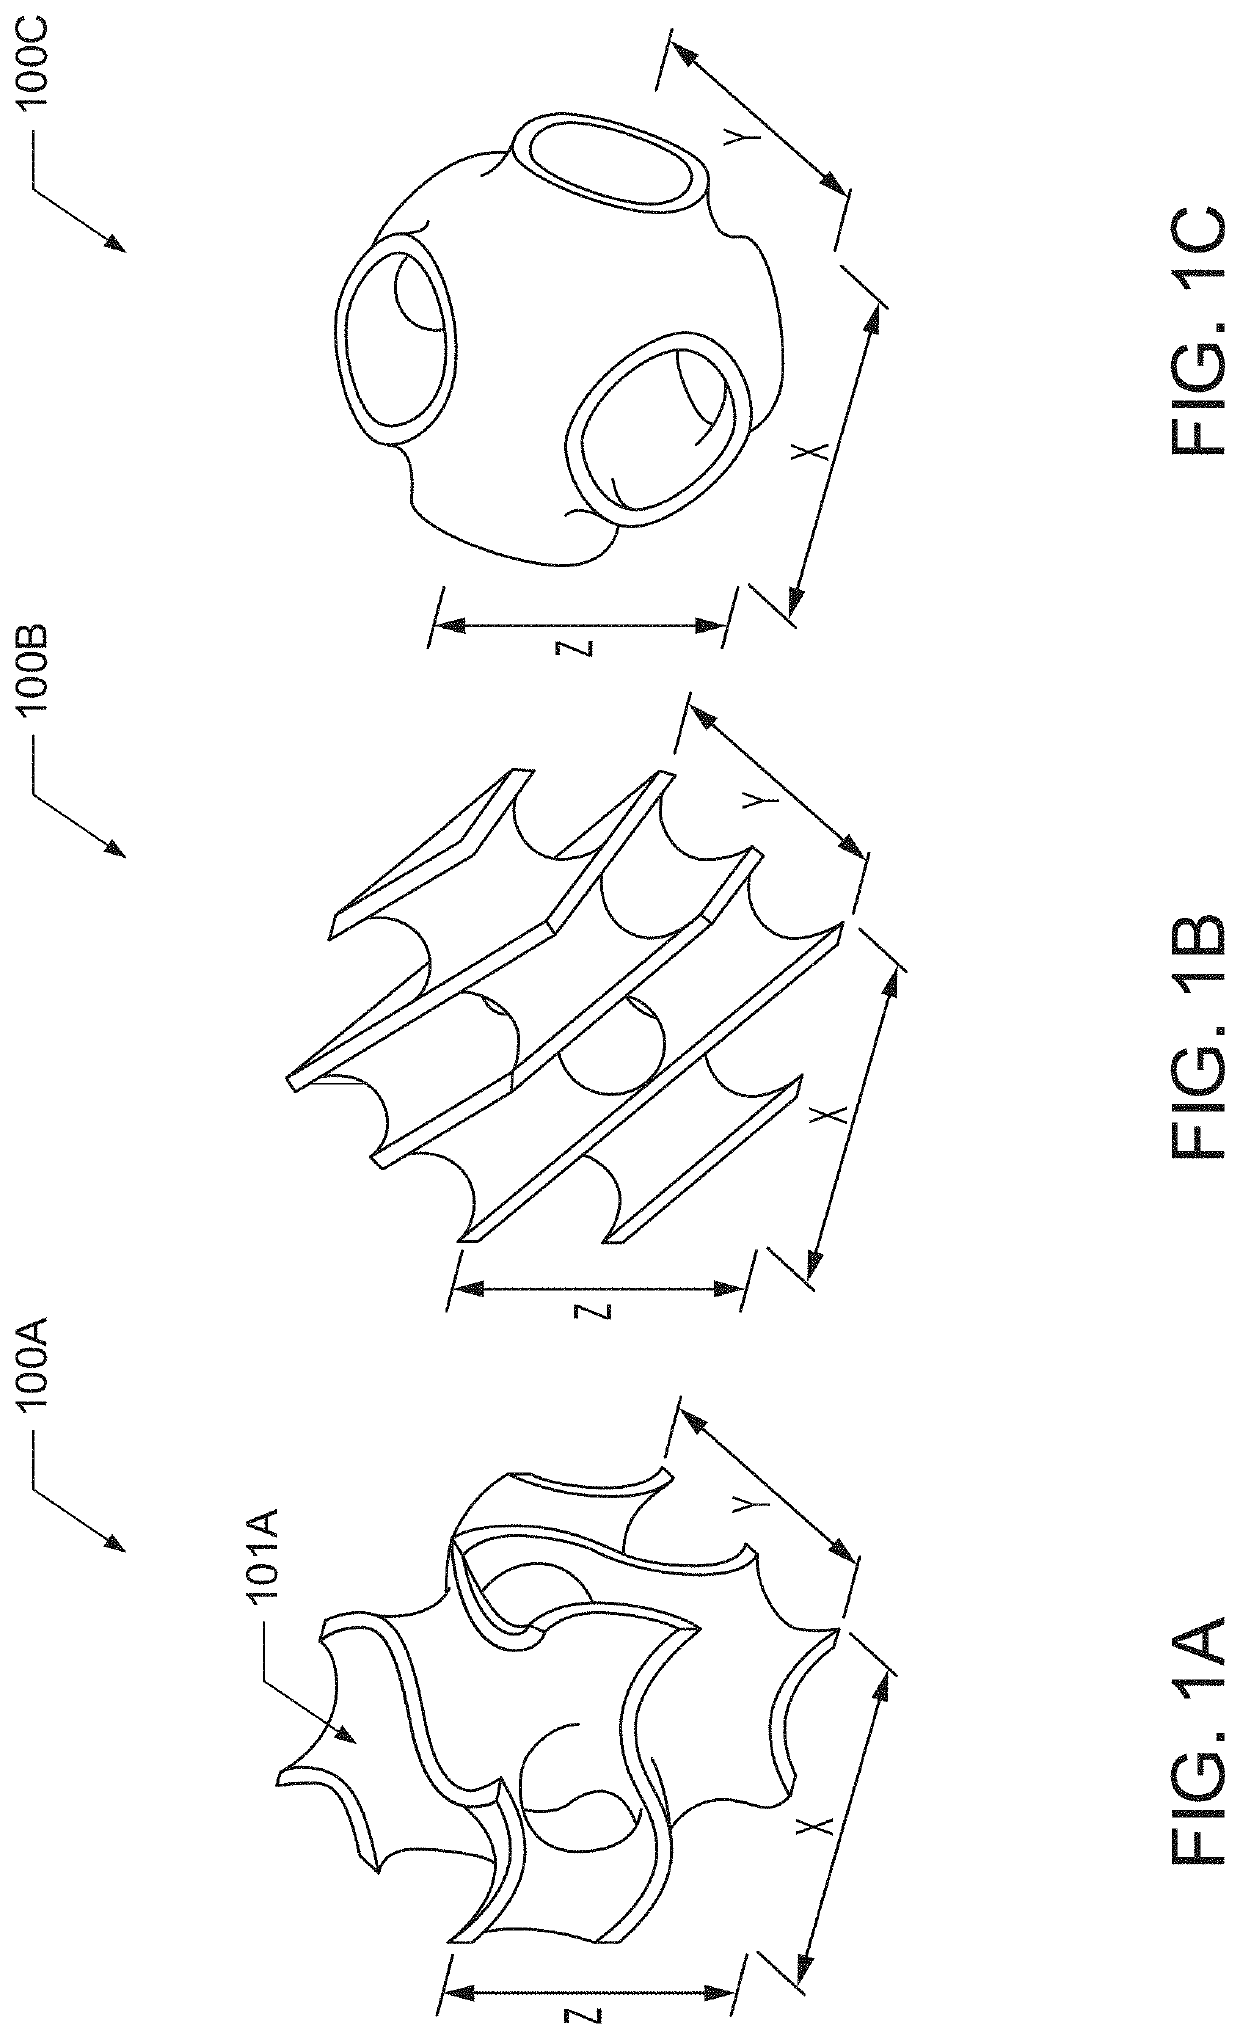 Sheet based triply periodic minimal surface implants for promoting osseointegration and methods for producing same